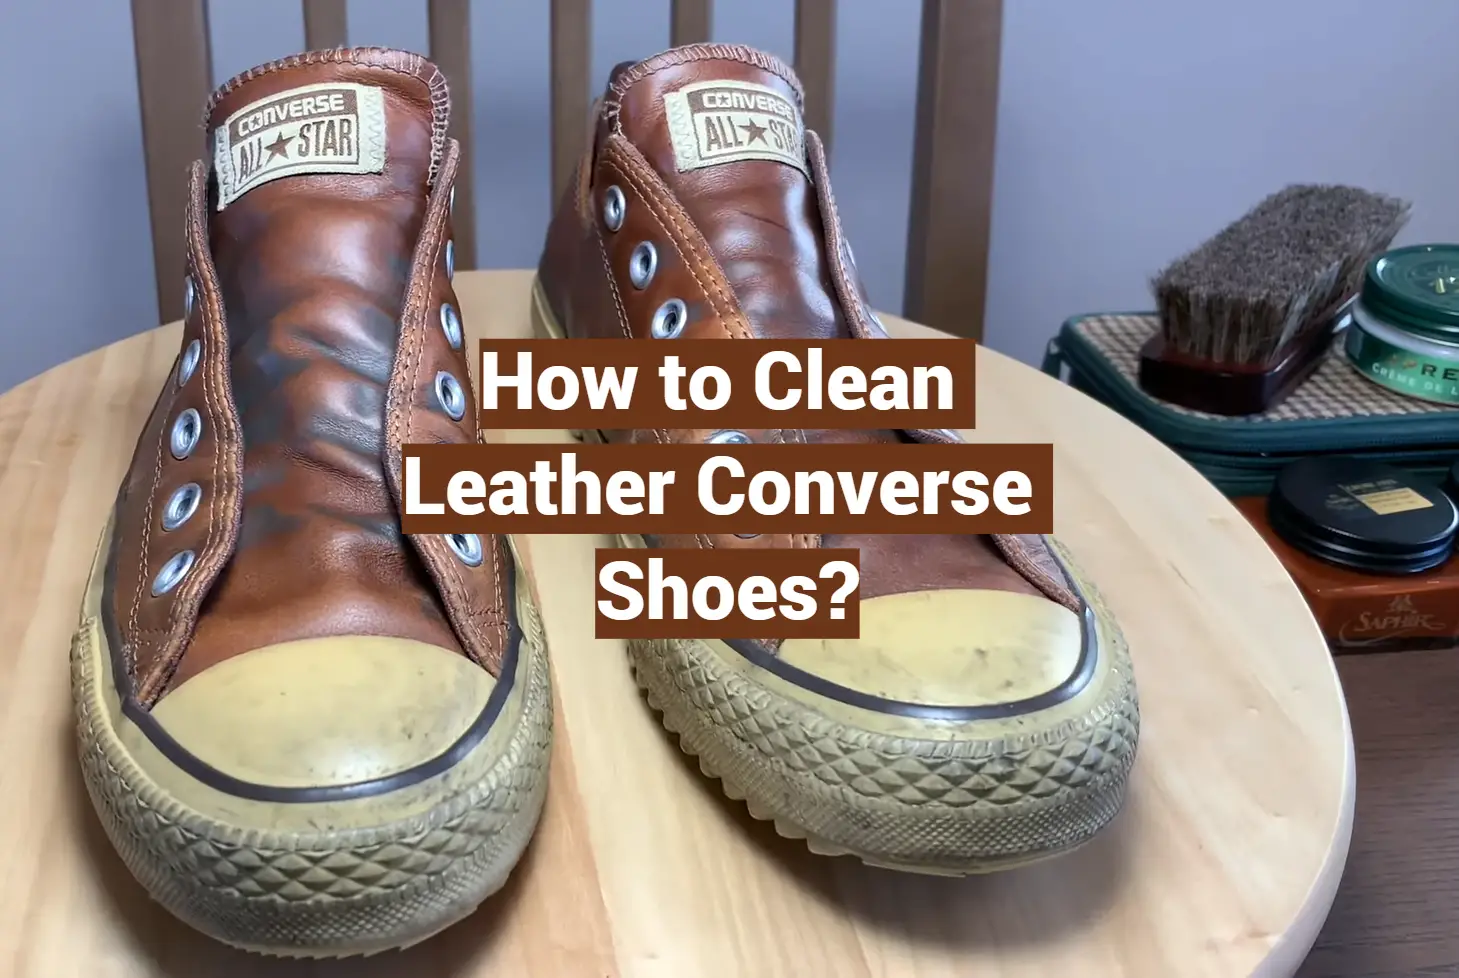 How to Clean Leather Converse Shoes?